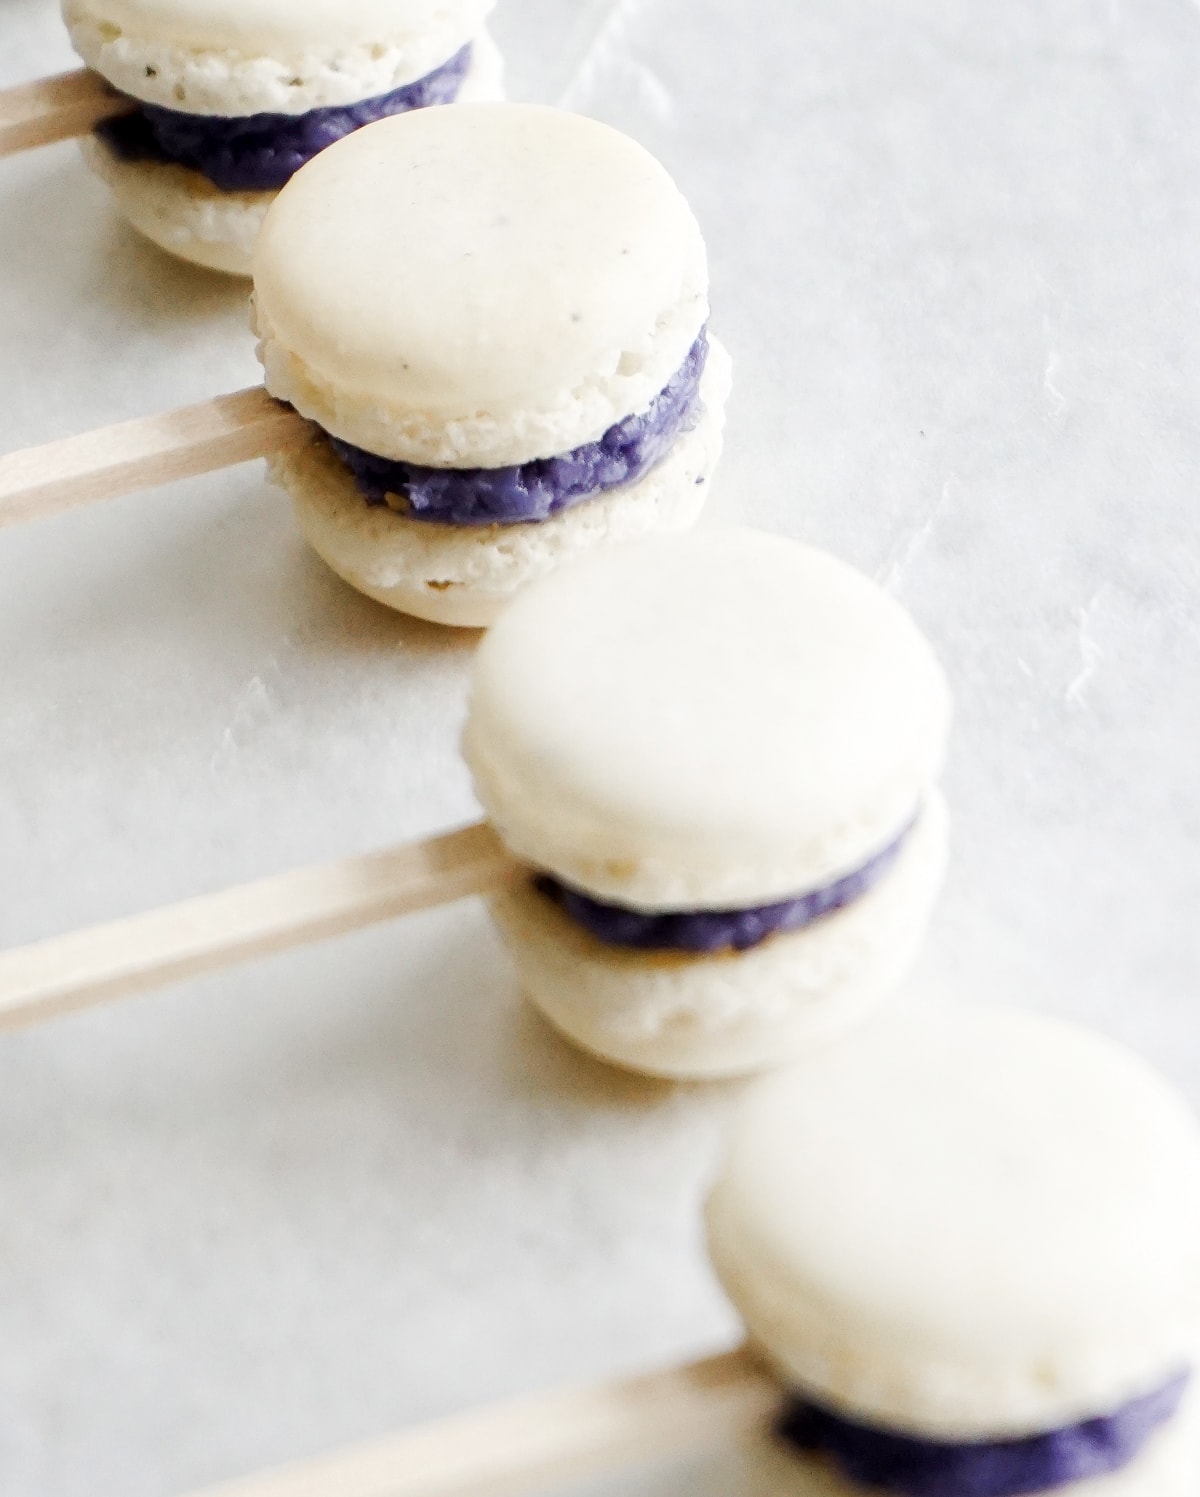 The cutest mini macaron cockail swizzle sticks for garnishing and eating, too! - Sugar and Cloth - houston blogger